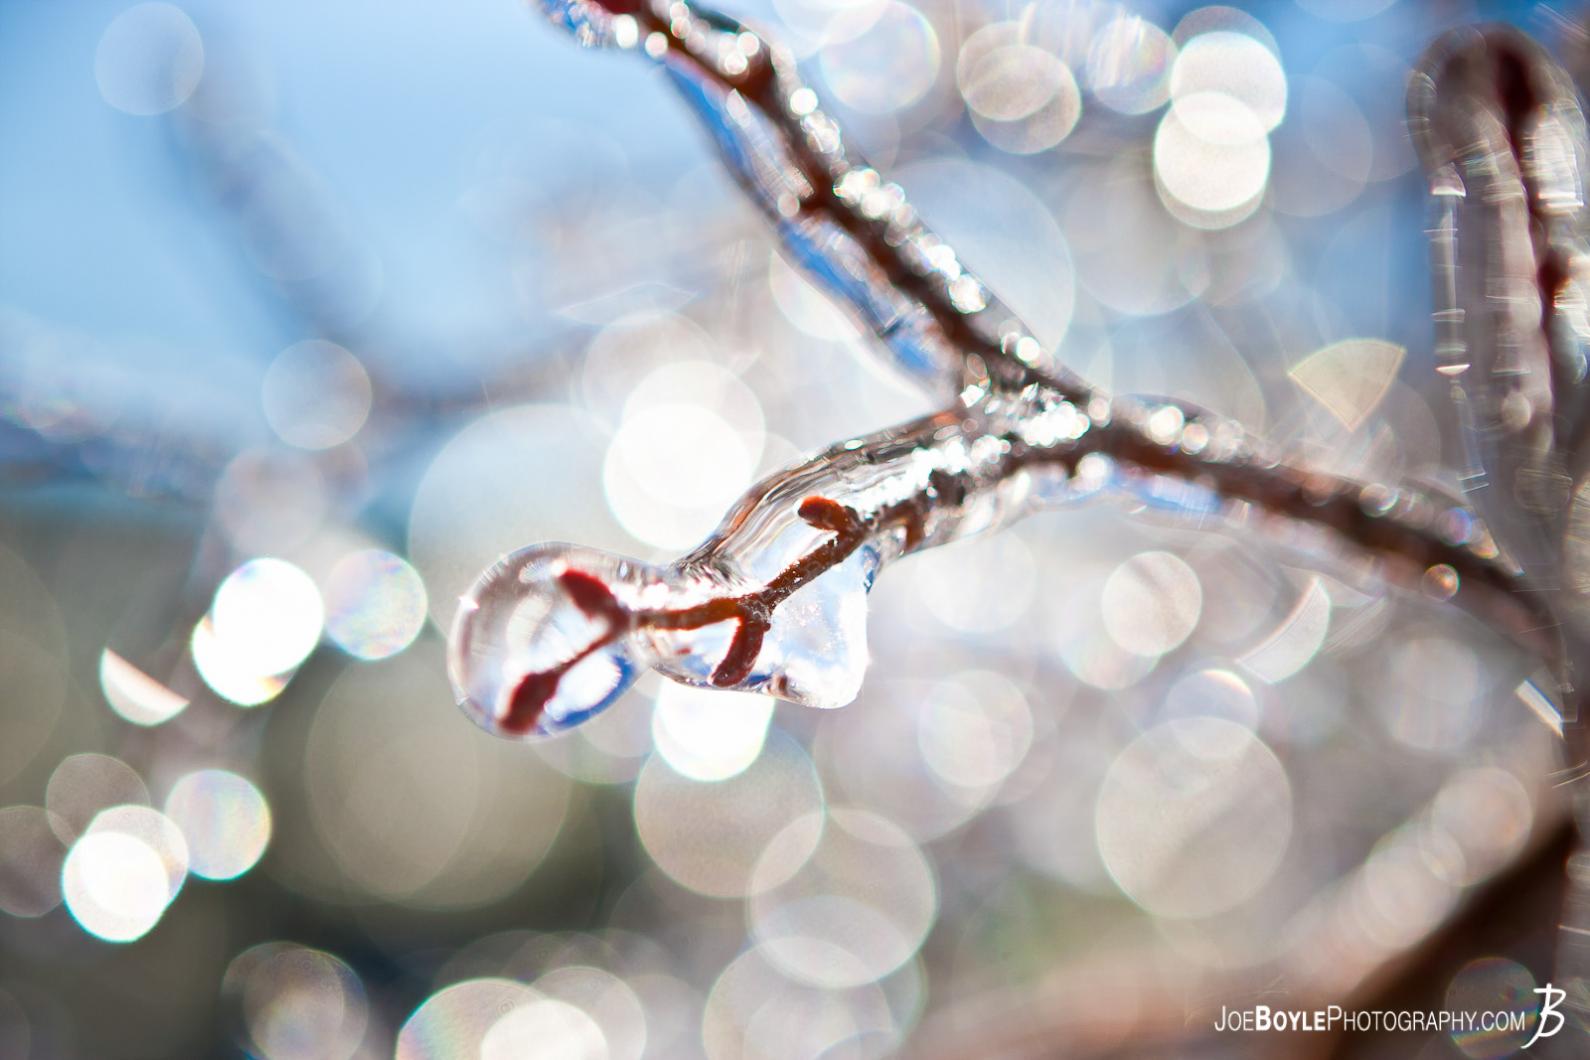 tree-branch-covered-in-ice-close-up